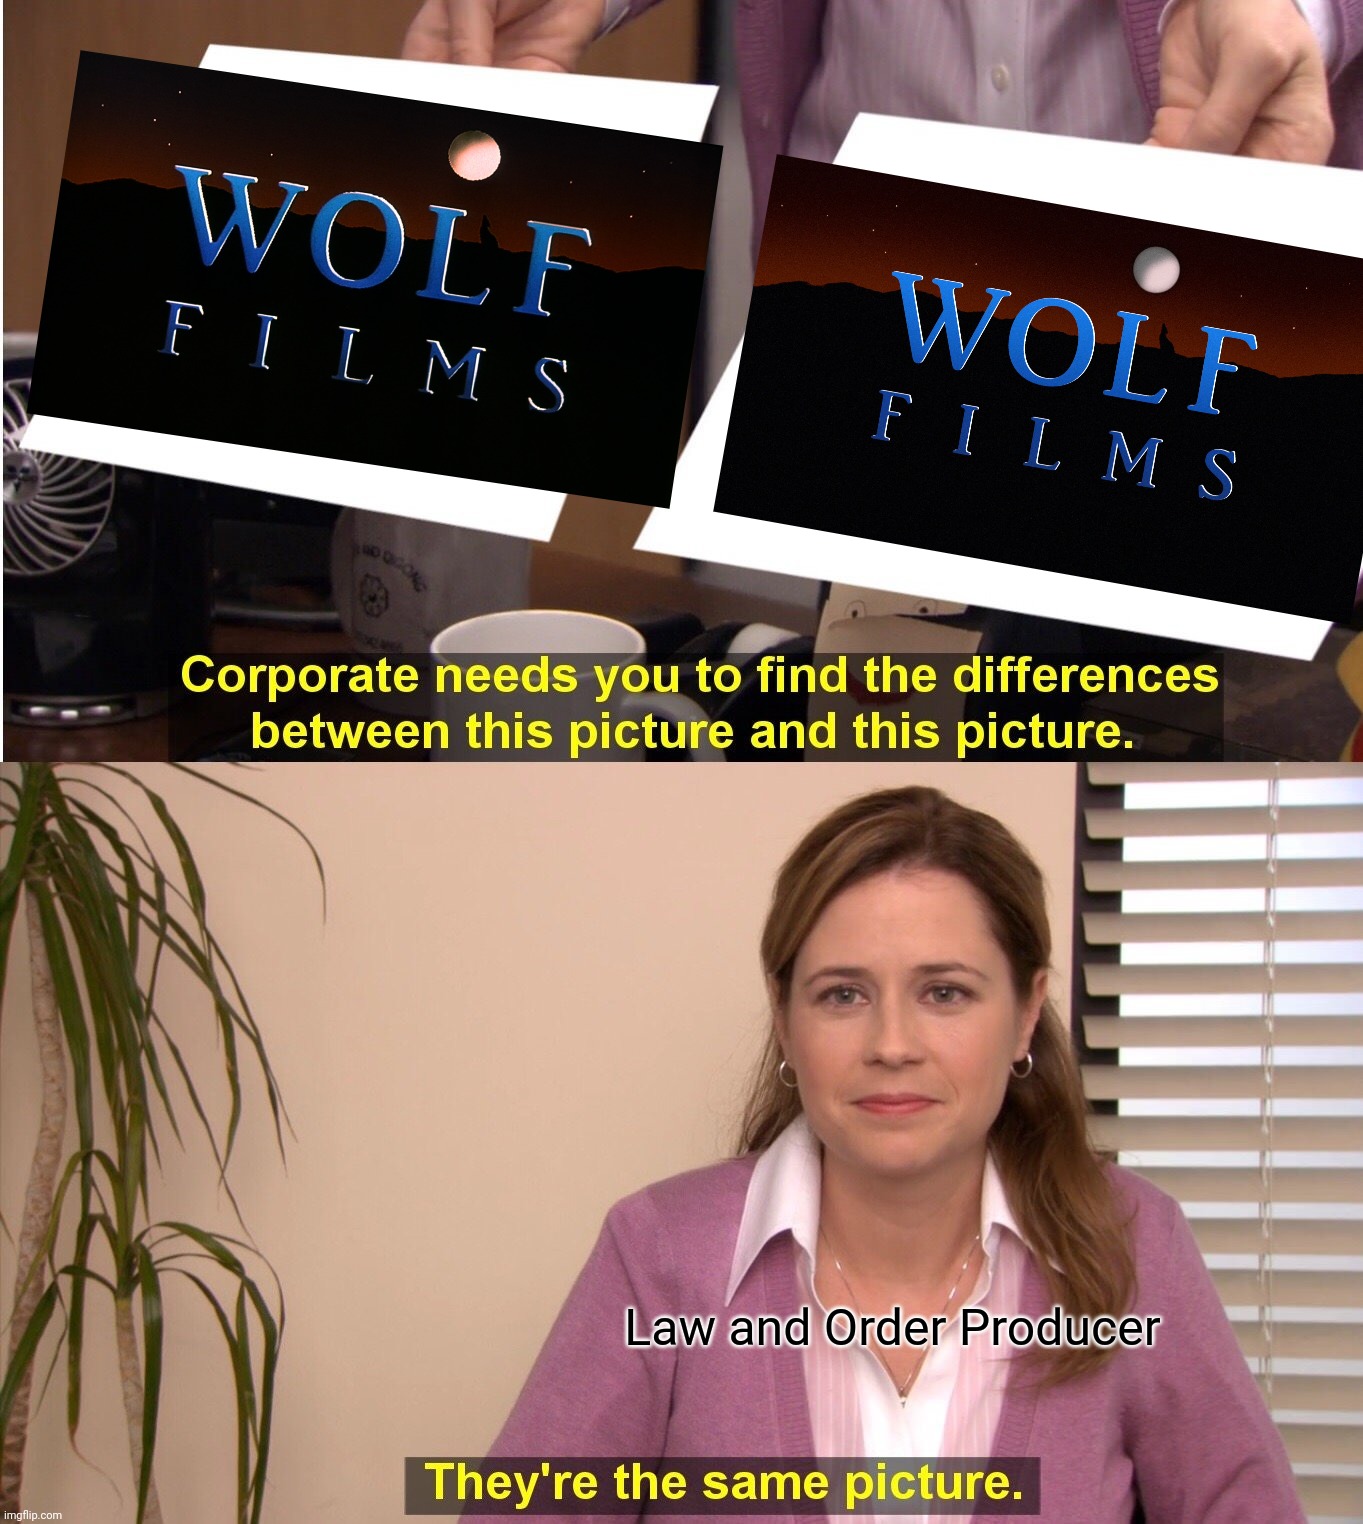 They're The Same Picture | Law and Order Producer | image tagged in memes,they're the same picture,wolf films logo 1989-2011,funny,law and order,popular | made w/ Imgflip meme maker